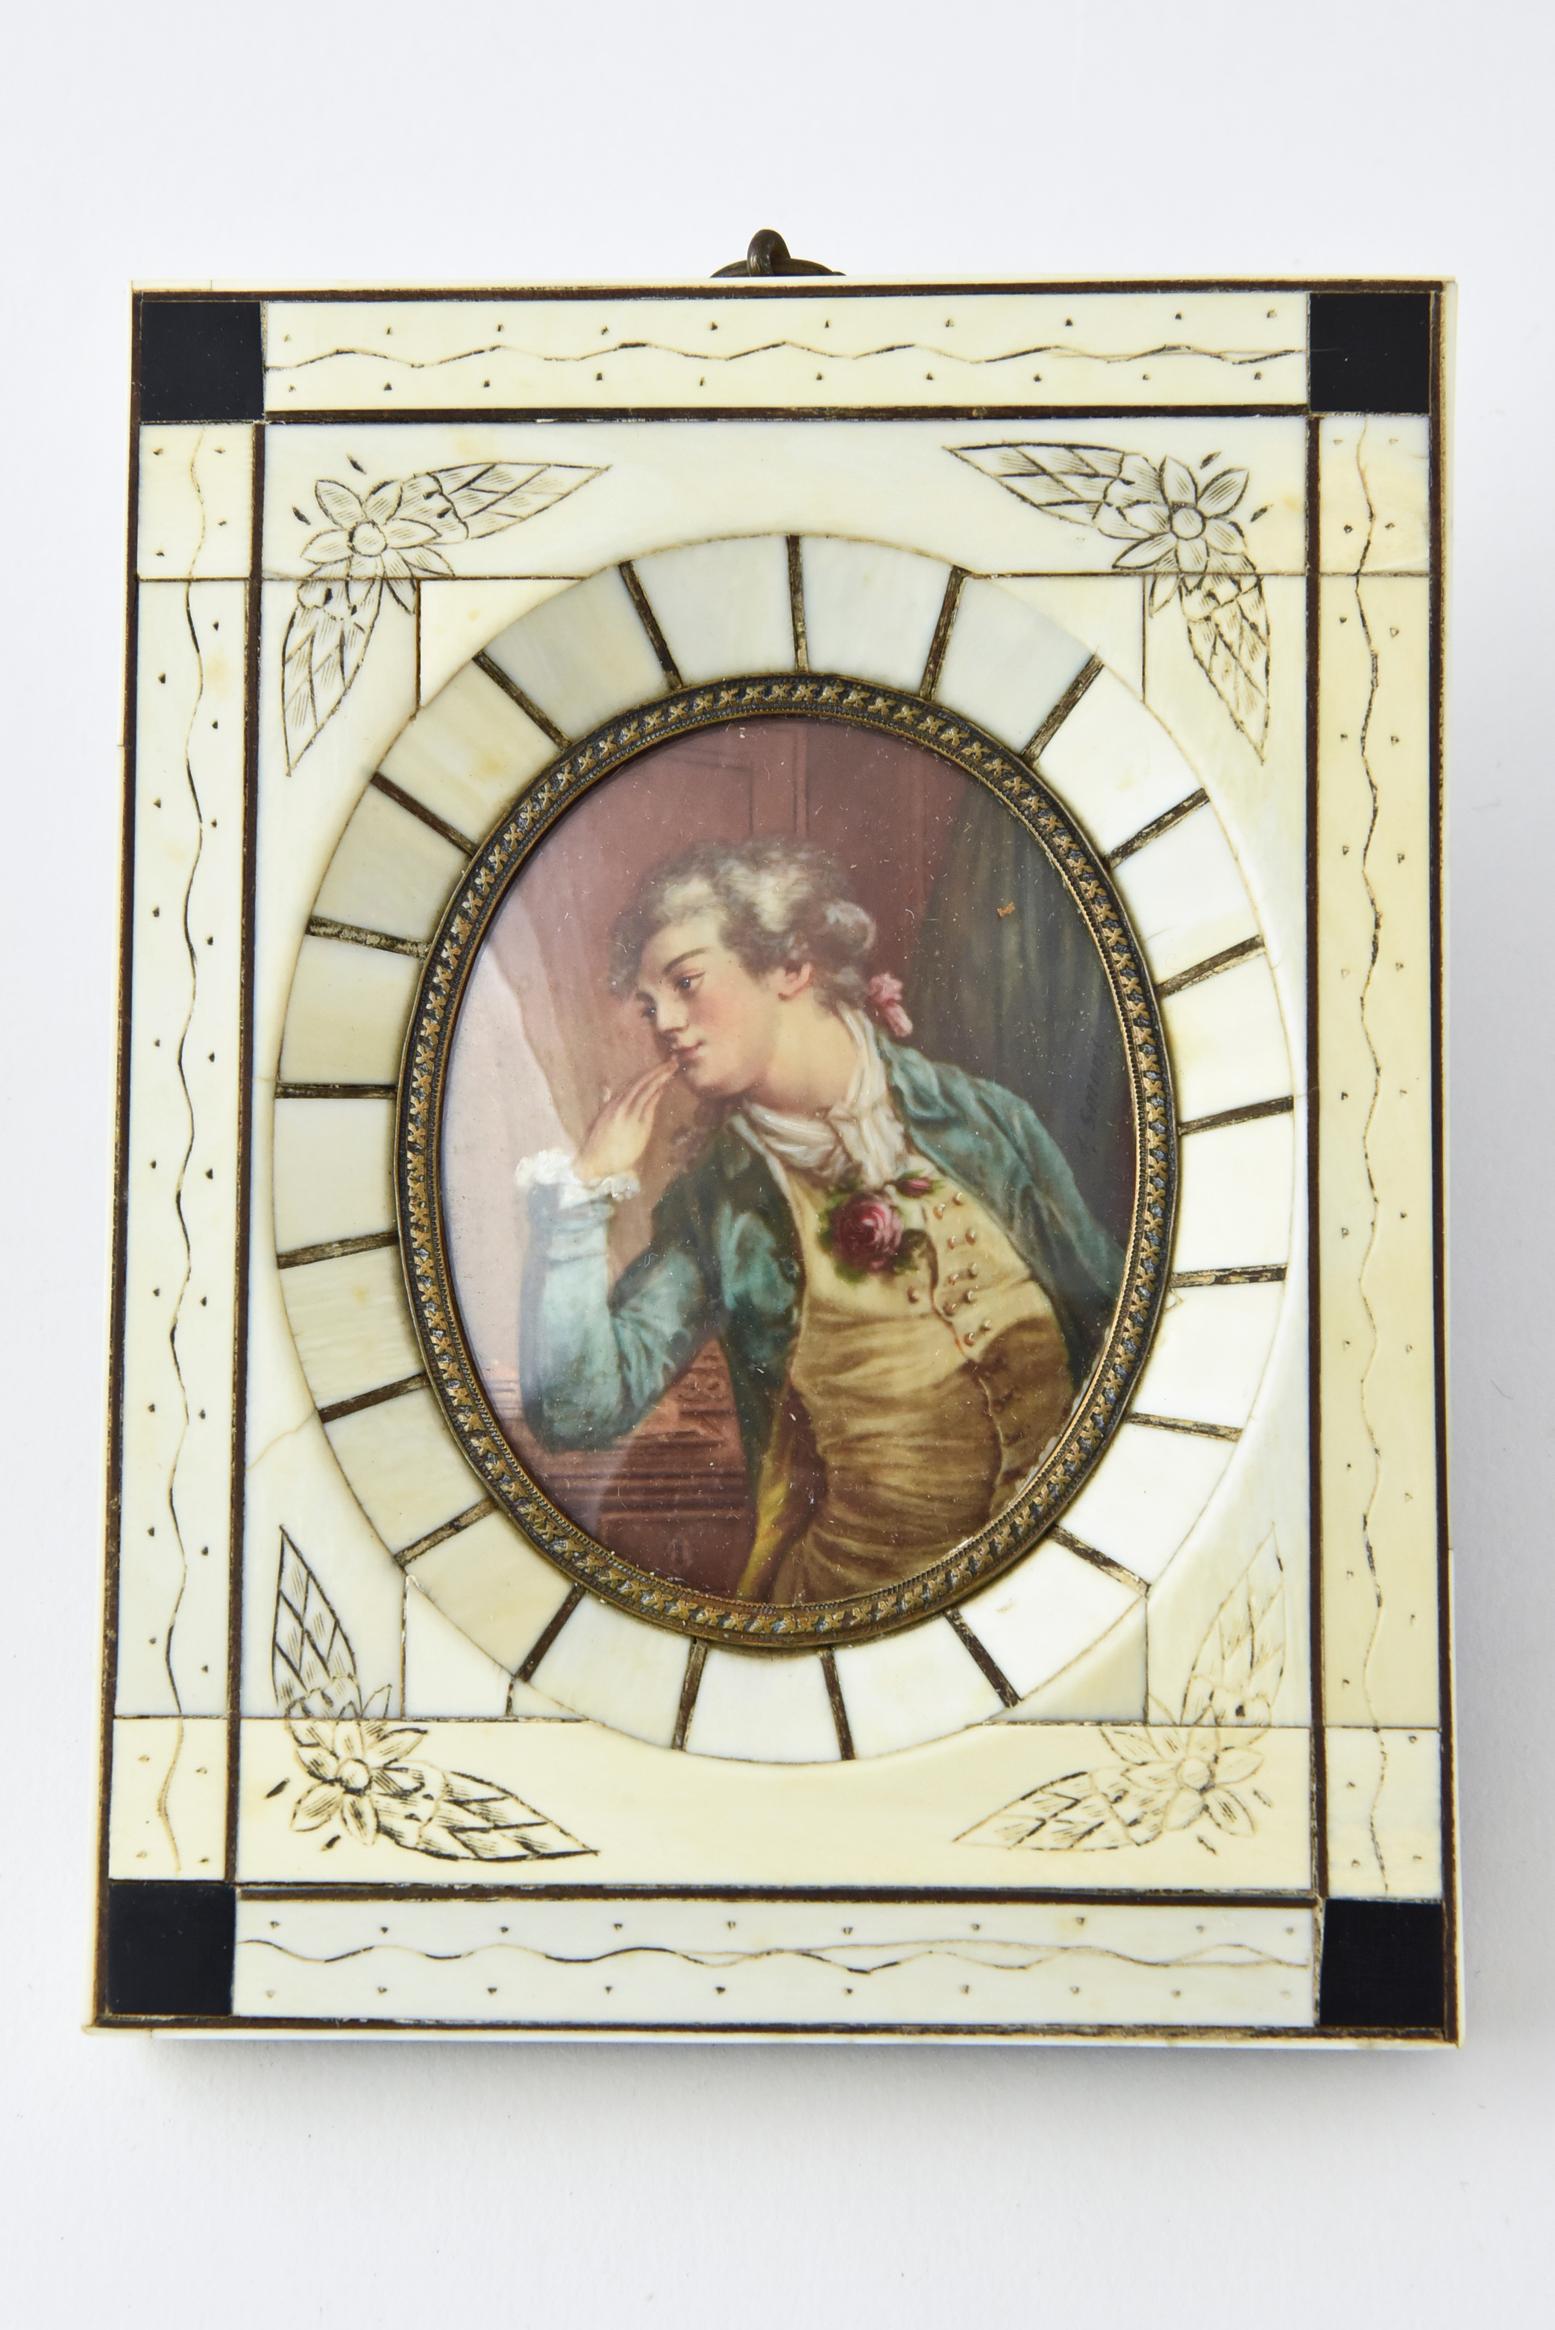 Pair of antique 19th century artist-signed hand painted miniature portraits of two lovers looking at each other from individual inlaid bone frames. Artist-signed J. Smont. The noble man is depicting MOZART courting a Risqué Noble Lady (look closely